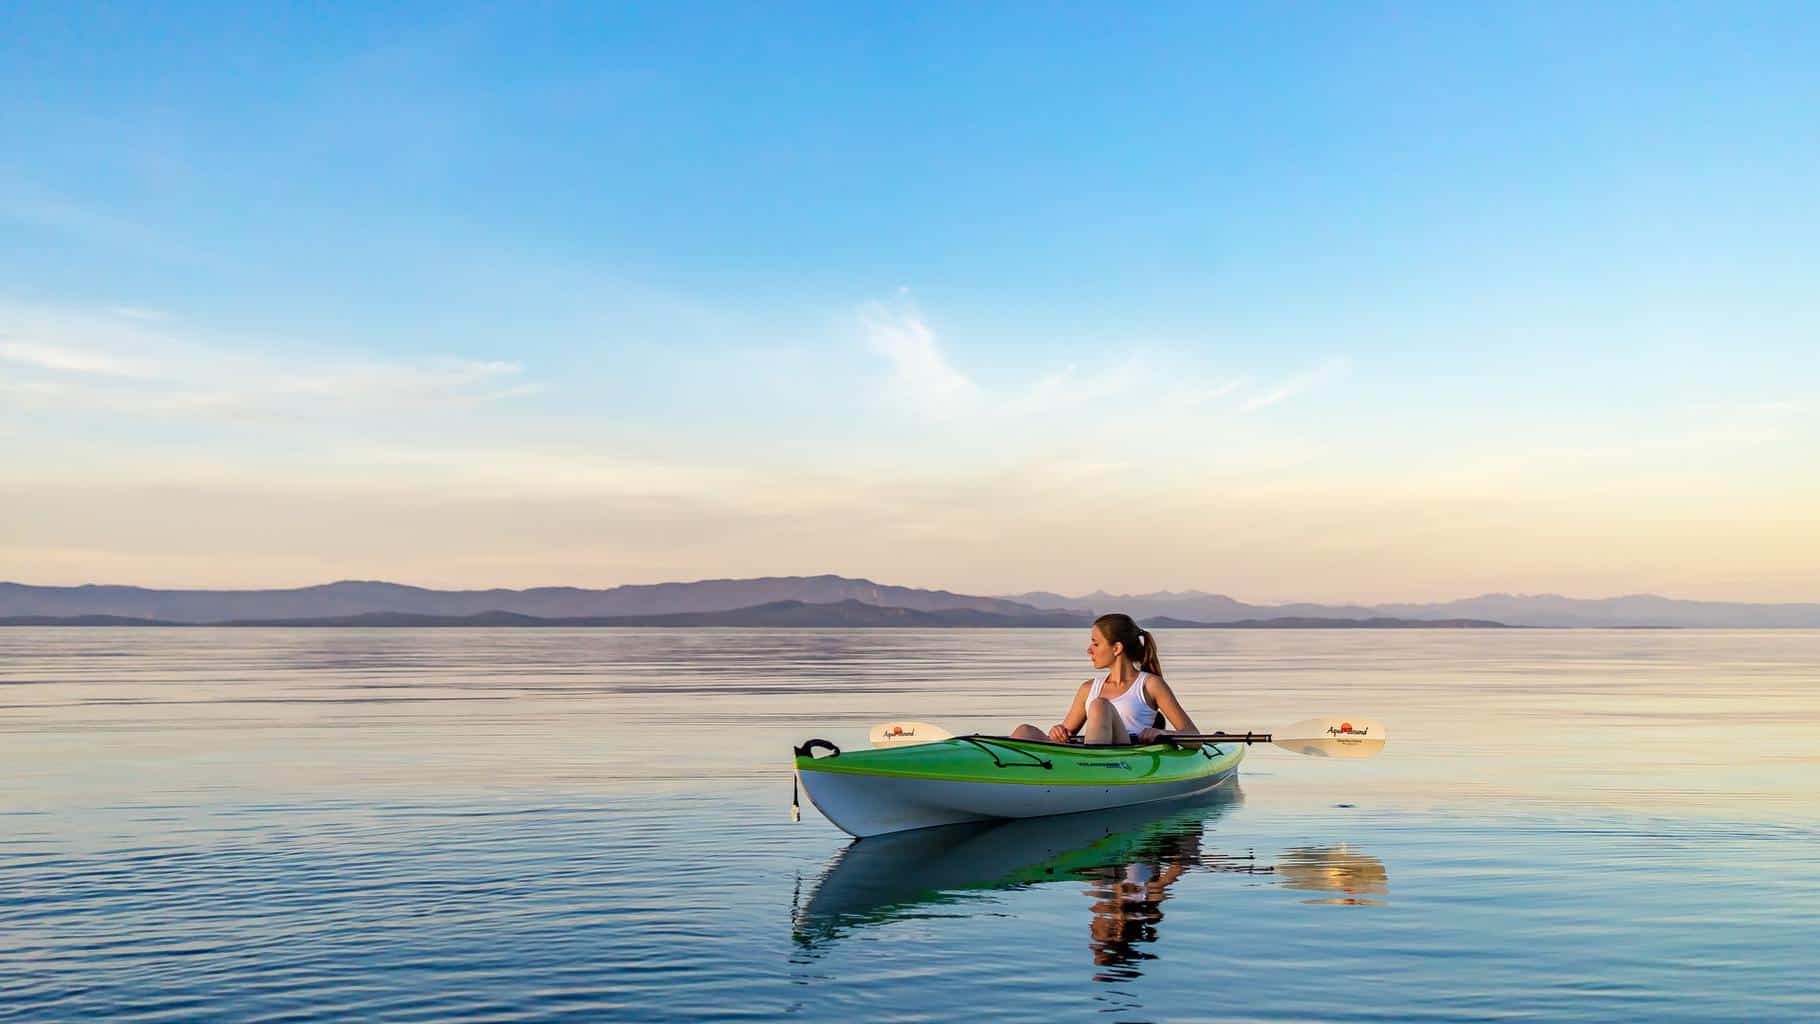 Is Kayaking Bad for Your Back? (+7 Tips to Avoid Pain and Injuries)